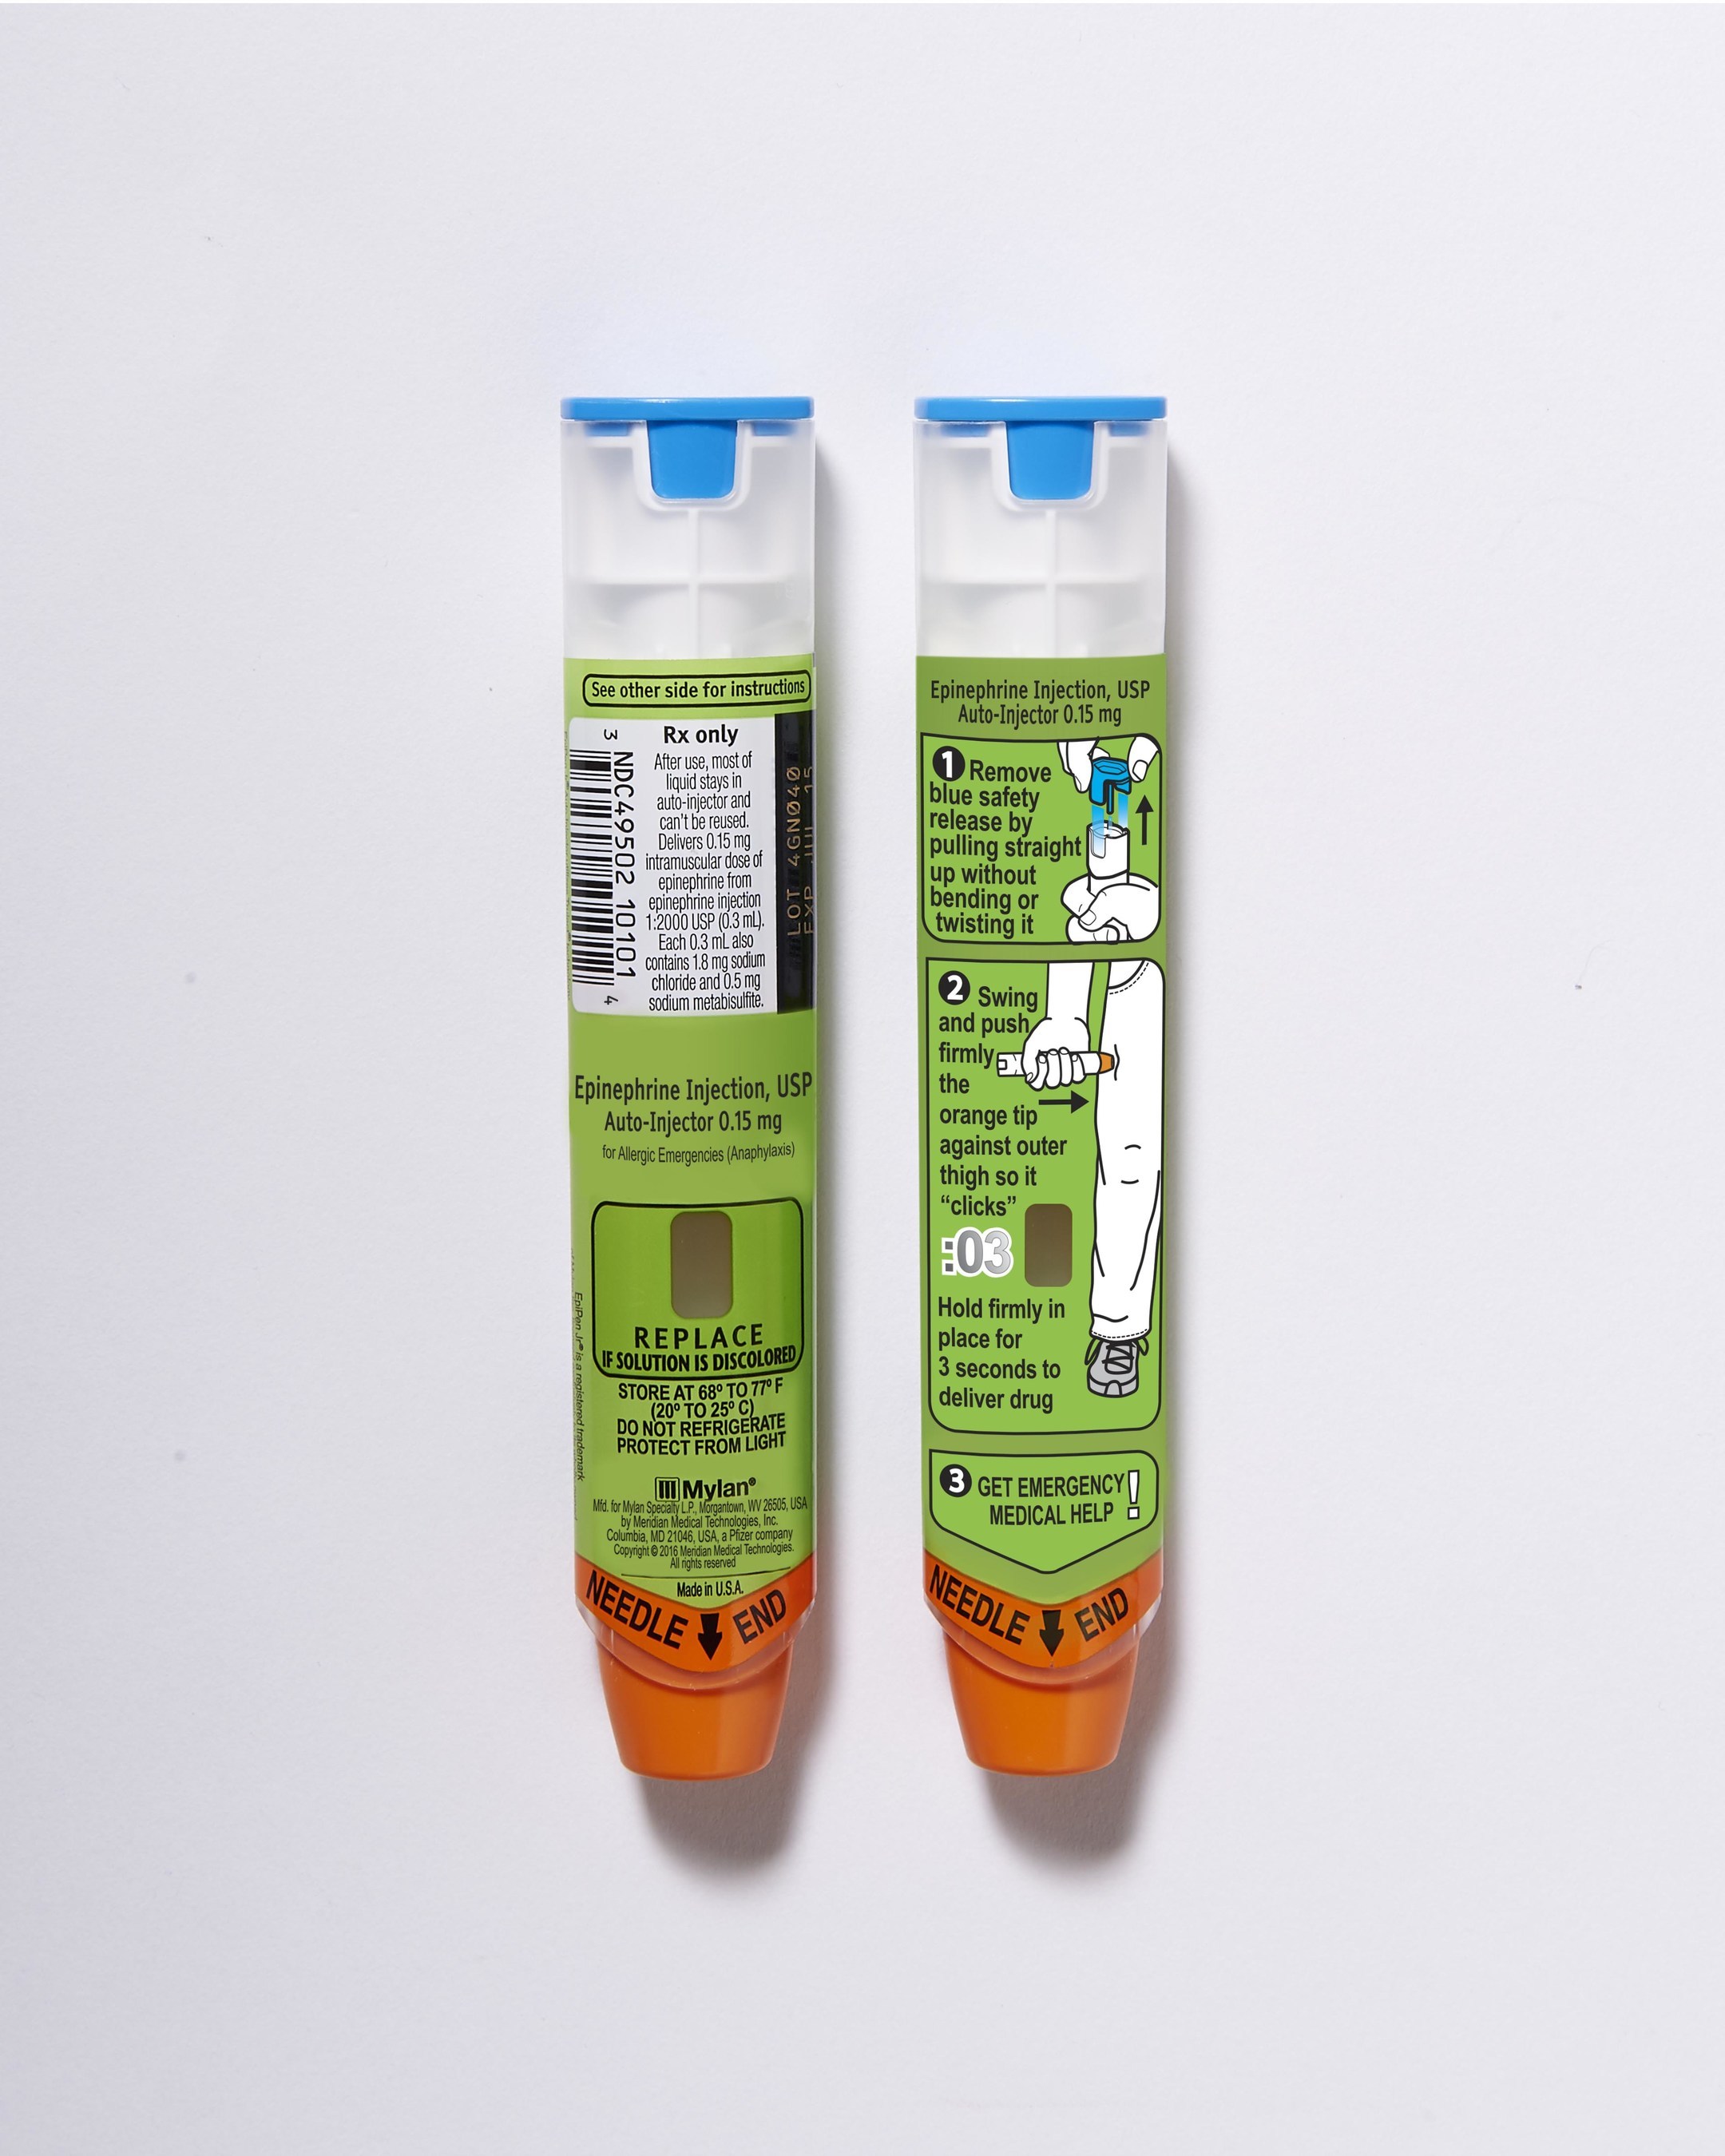 Mylan Launches the First Generic for EpiPen® (epinephrine injection